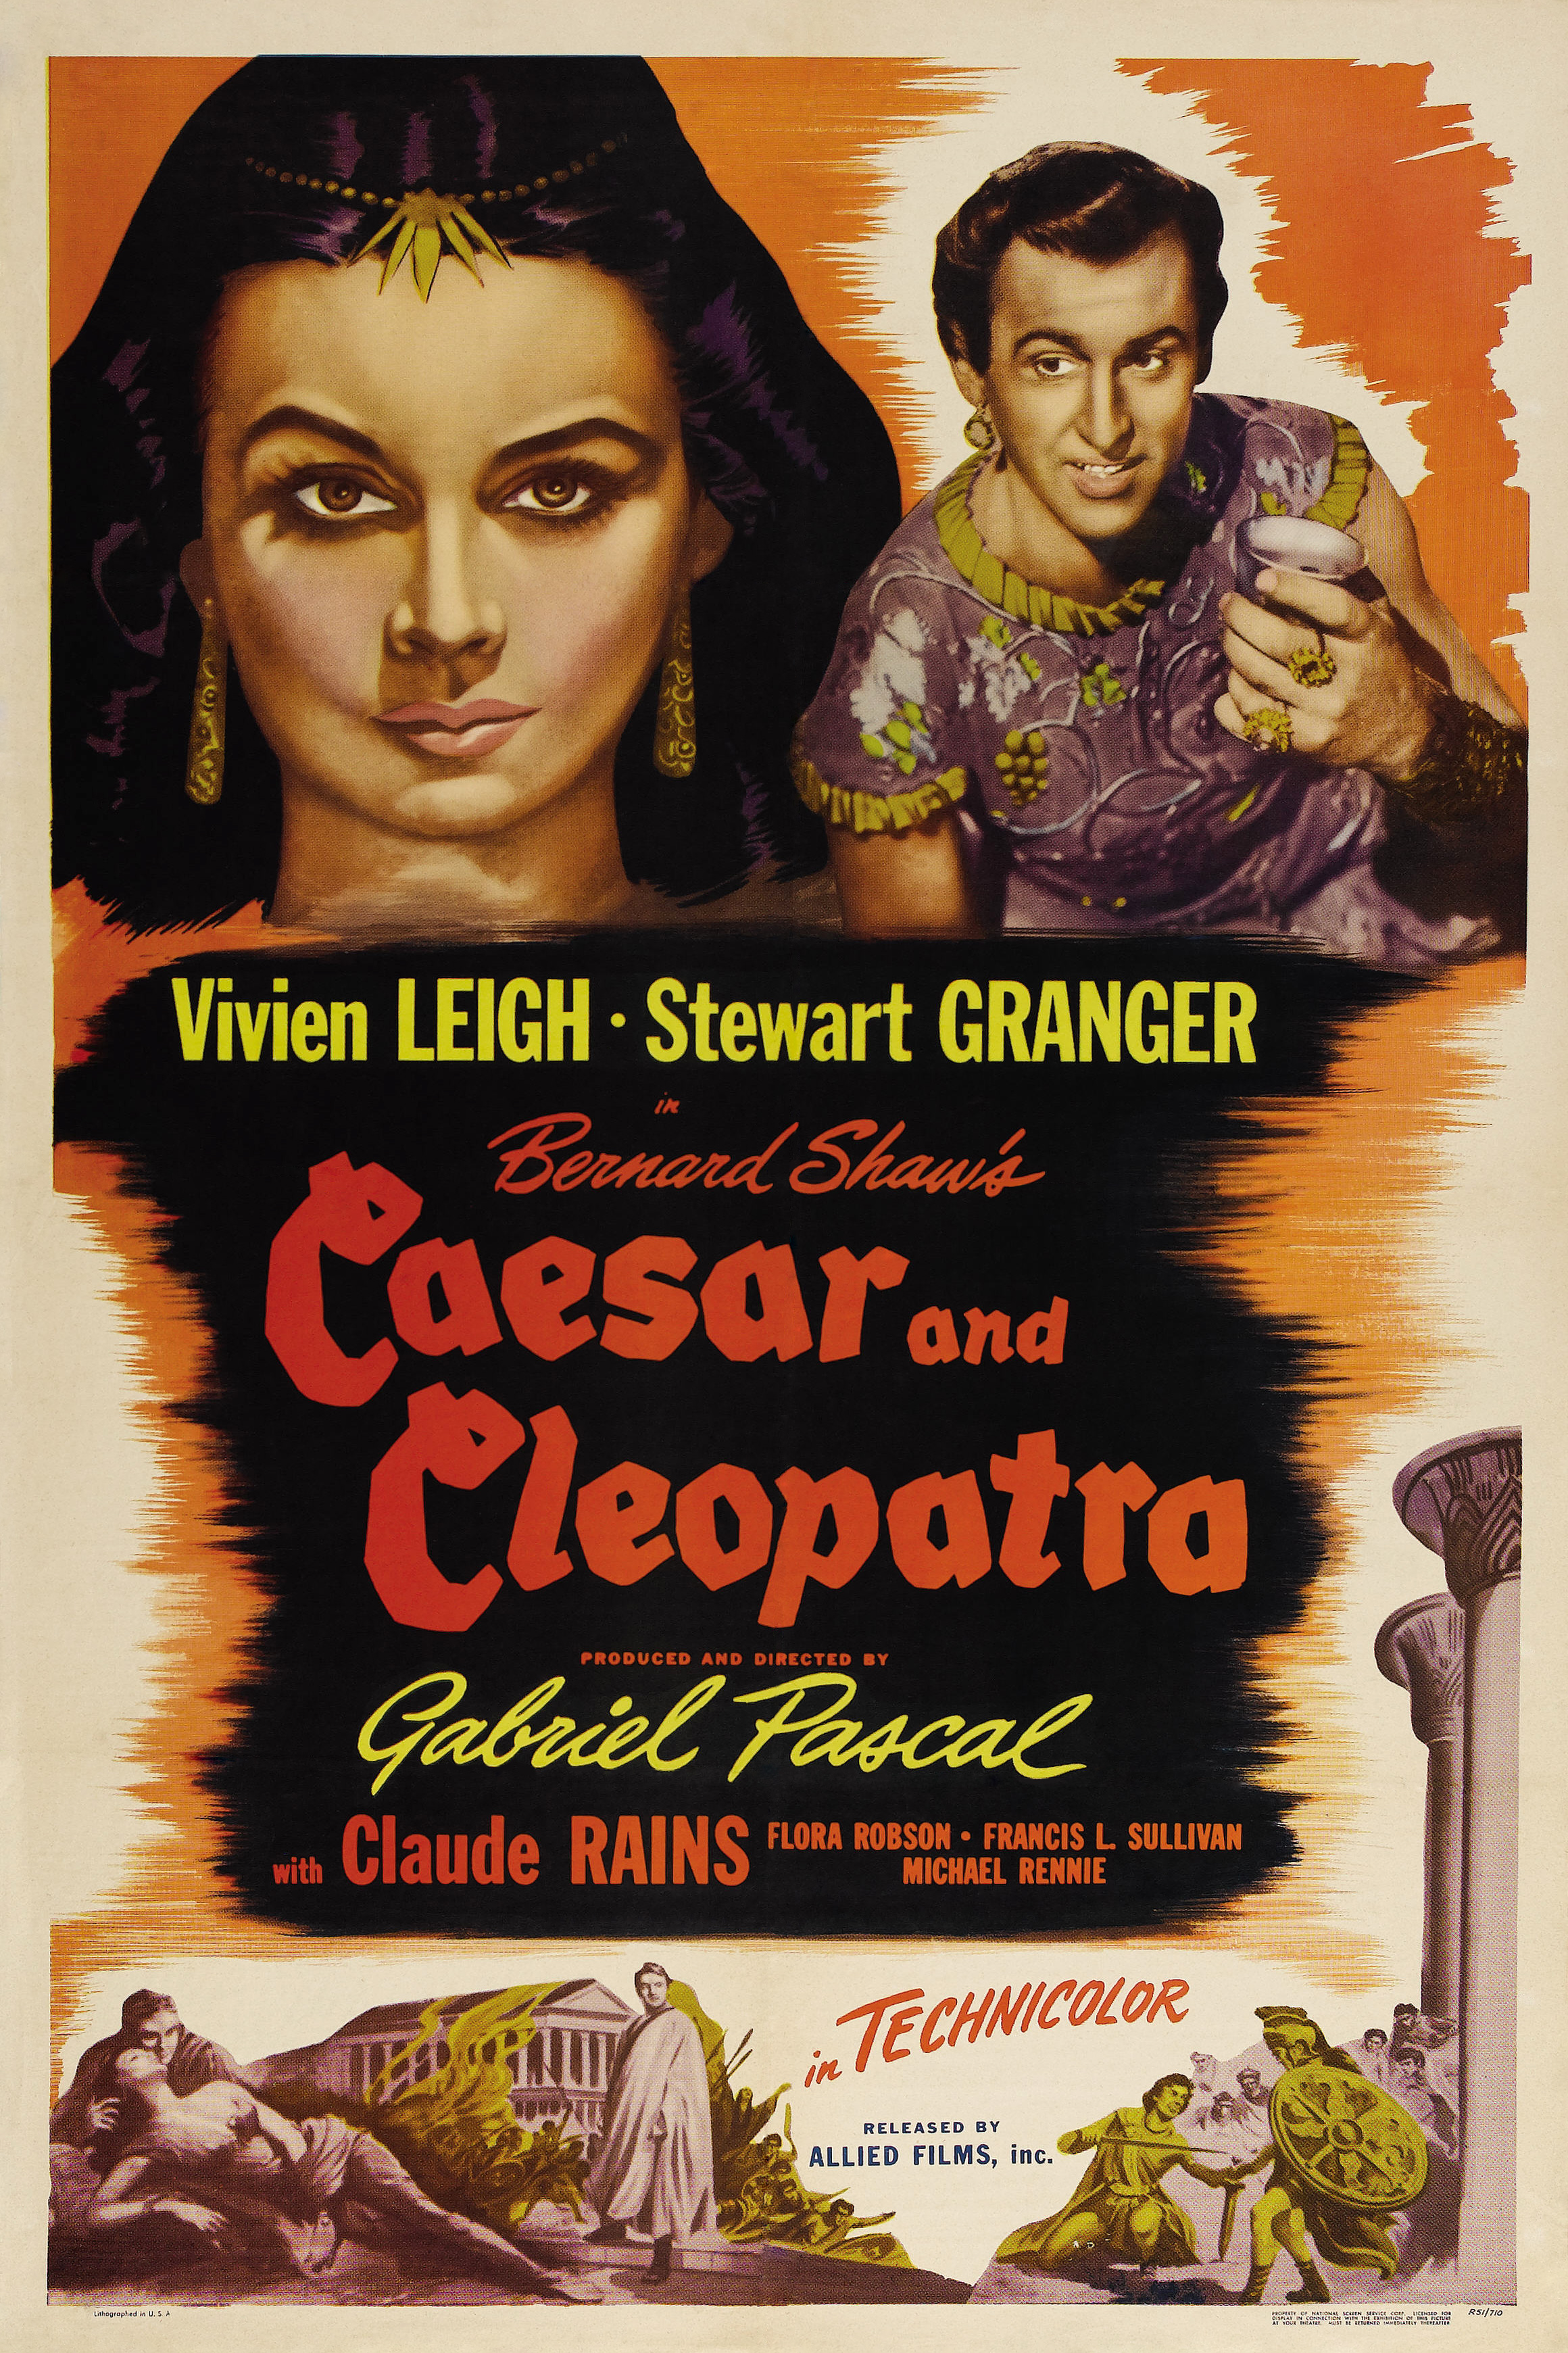 http://www.doctormacro.com/Images/Posters/C/Poster%20-%20Caesar%20and%20Cleopatra_01.jpg